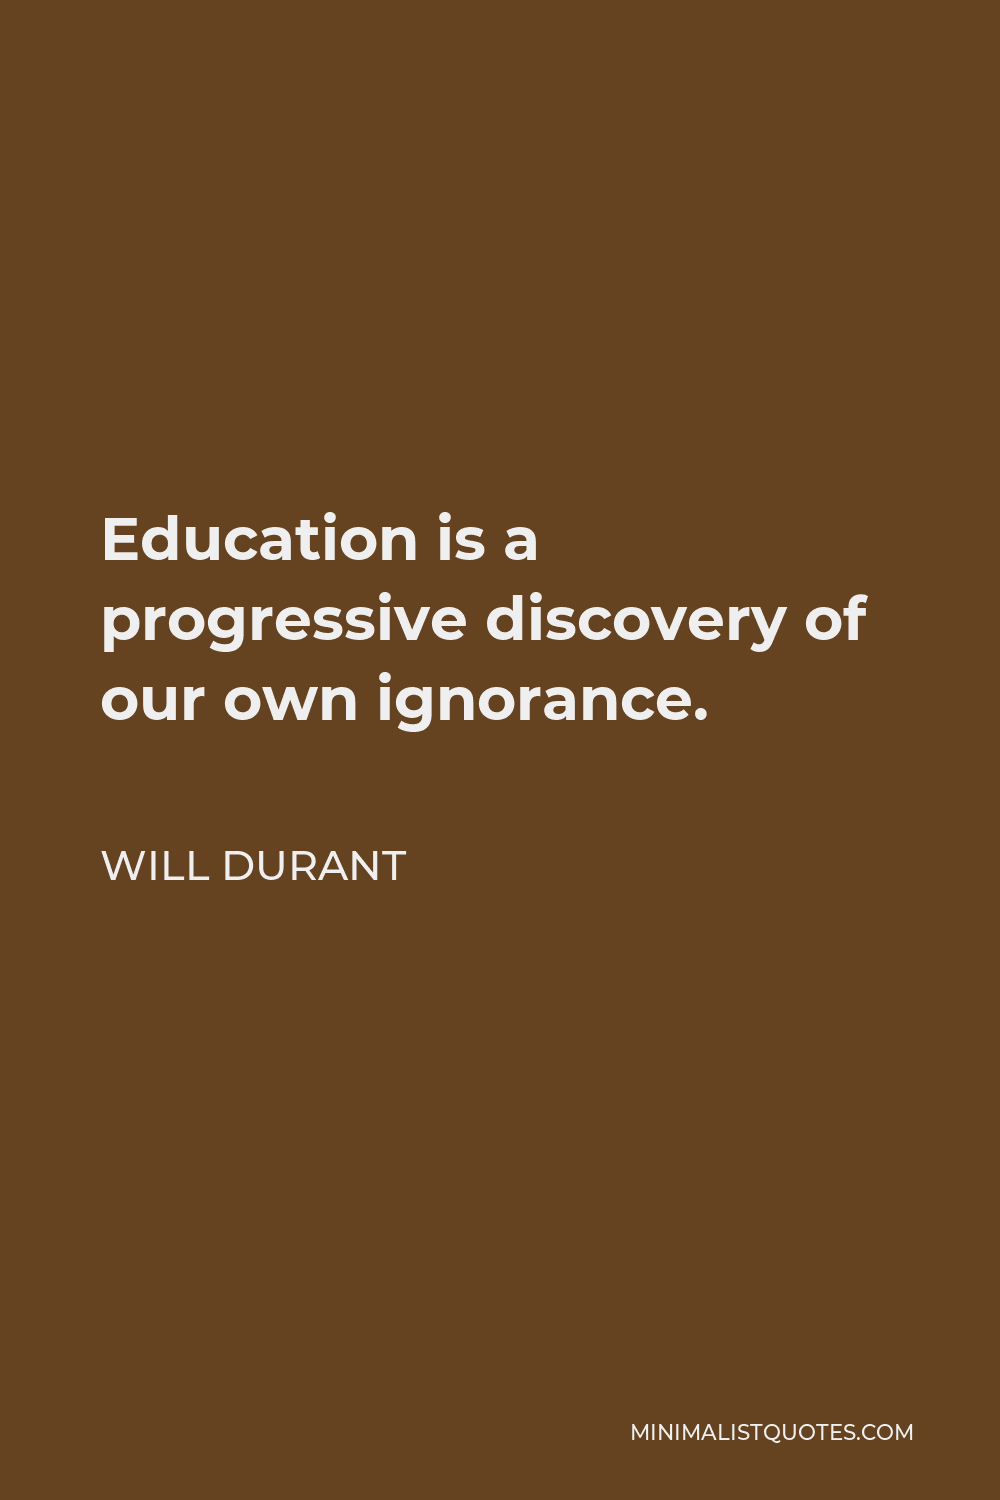 Will Durant Quote - Education is a progressive discovery of our own ignorance.